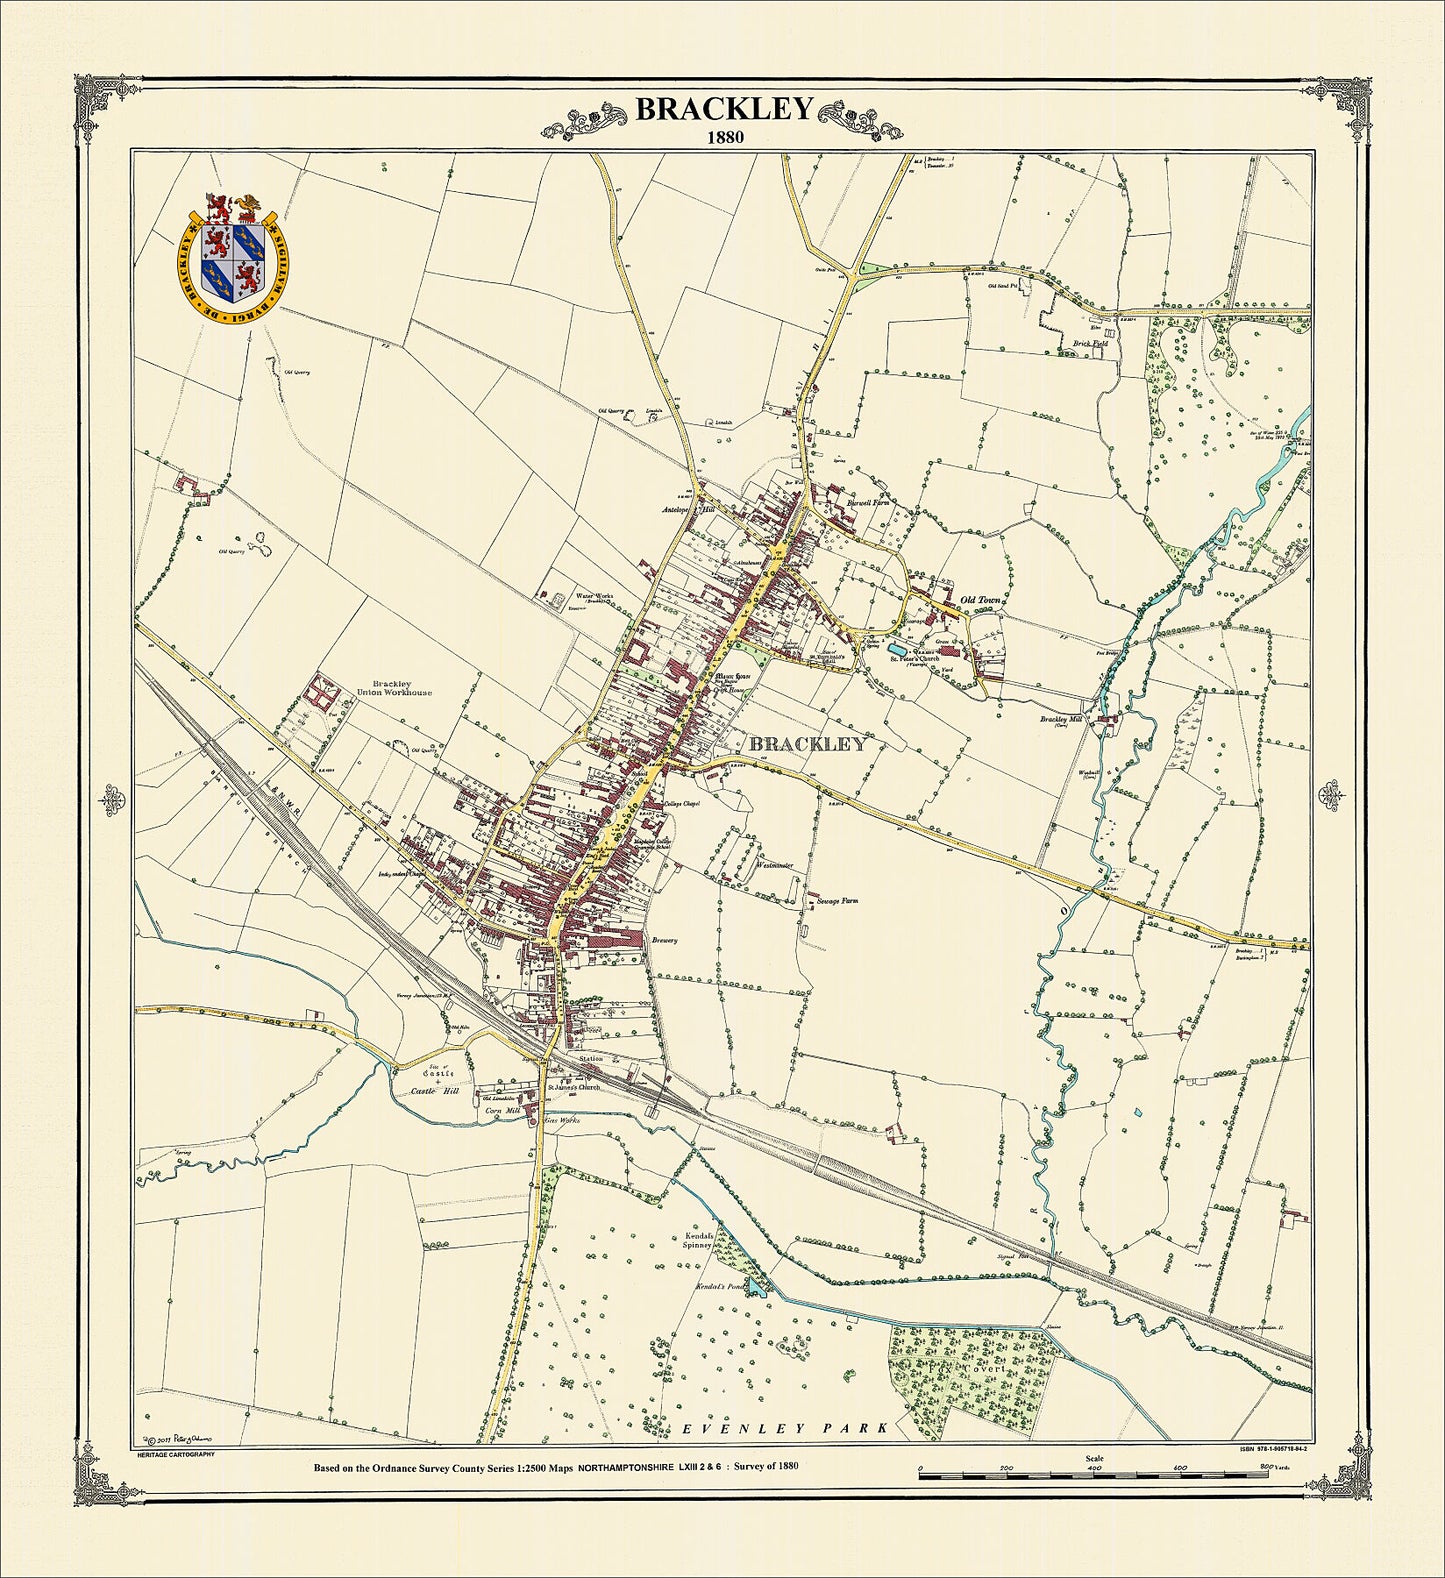 Coloured Victorian map of Brackley in 1880 by Peter J Adams of Heritage Cartography